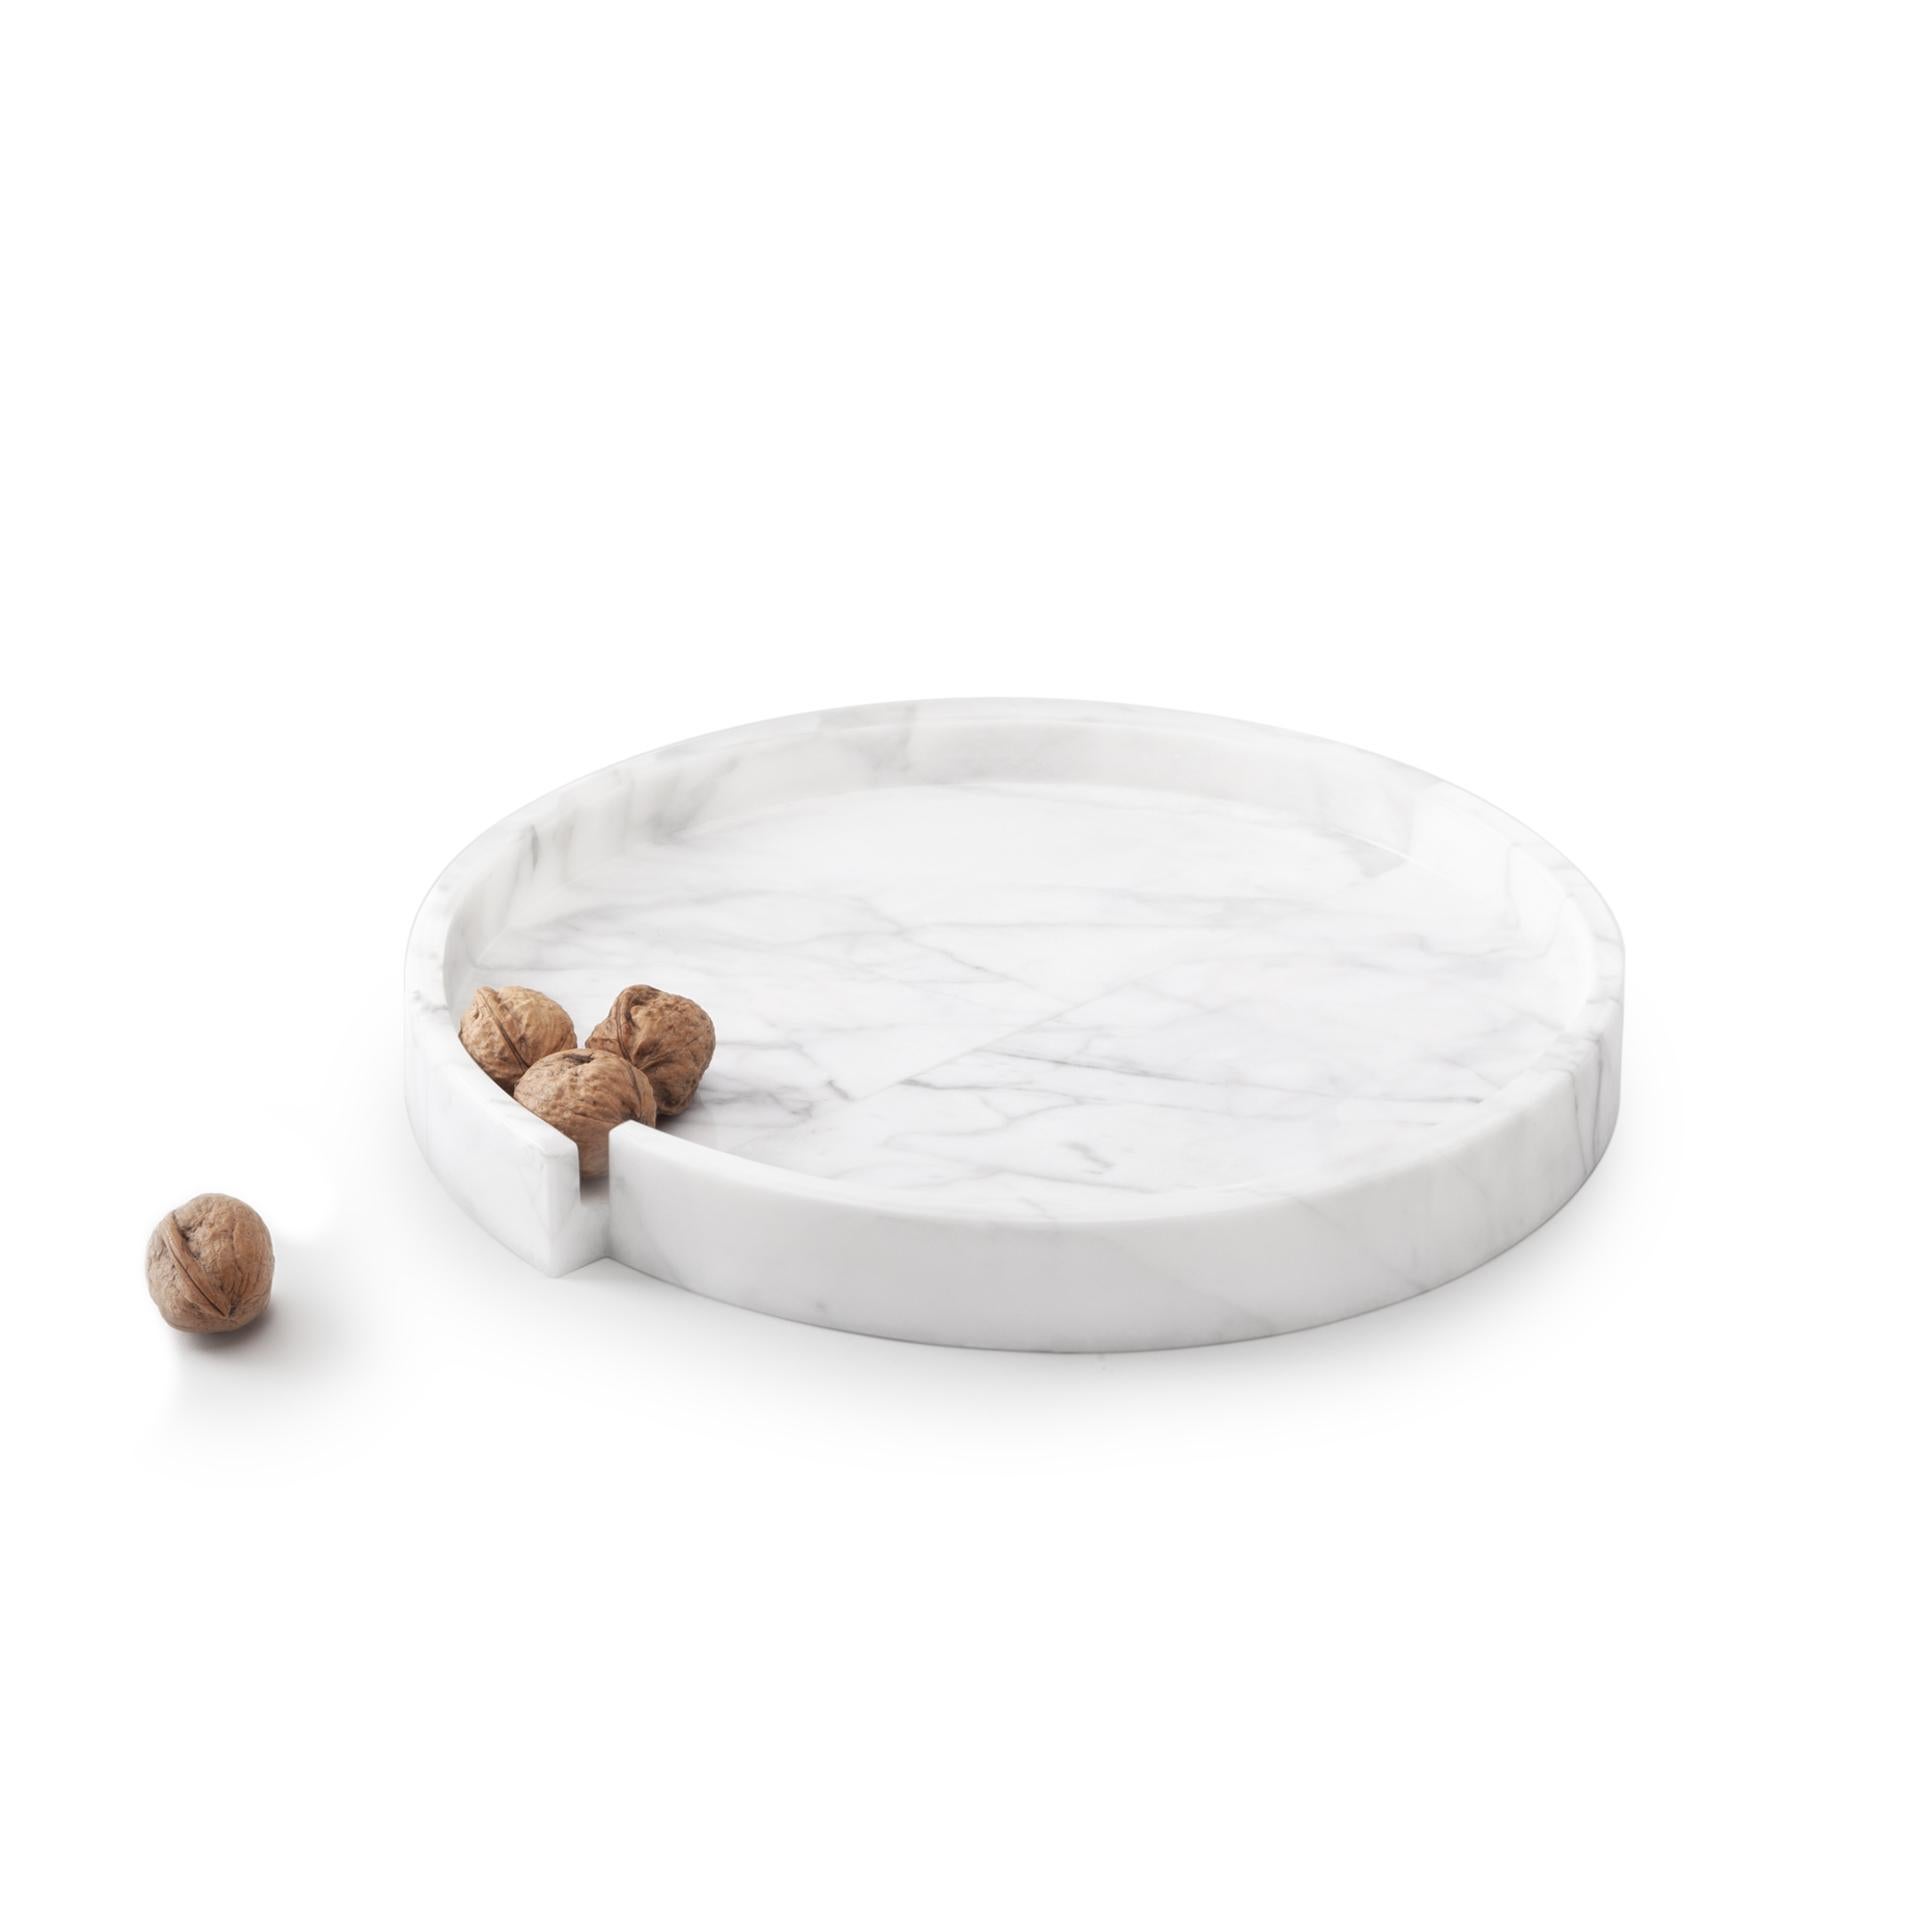 A playful and elegant marble tray made of two halves that appear to be matched incorrectly. The simplicity of the shape together with the choice of materials makes this a very versatile piece that can be used to add an understated detail to any